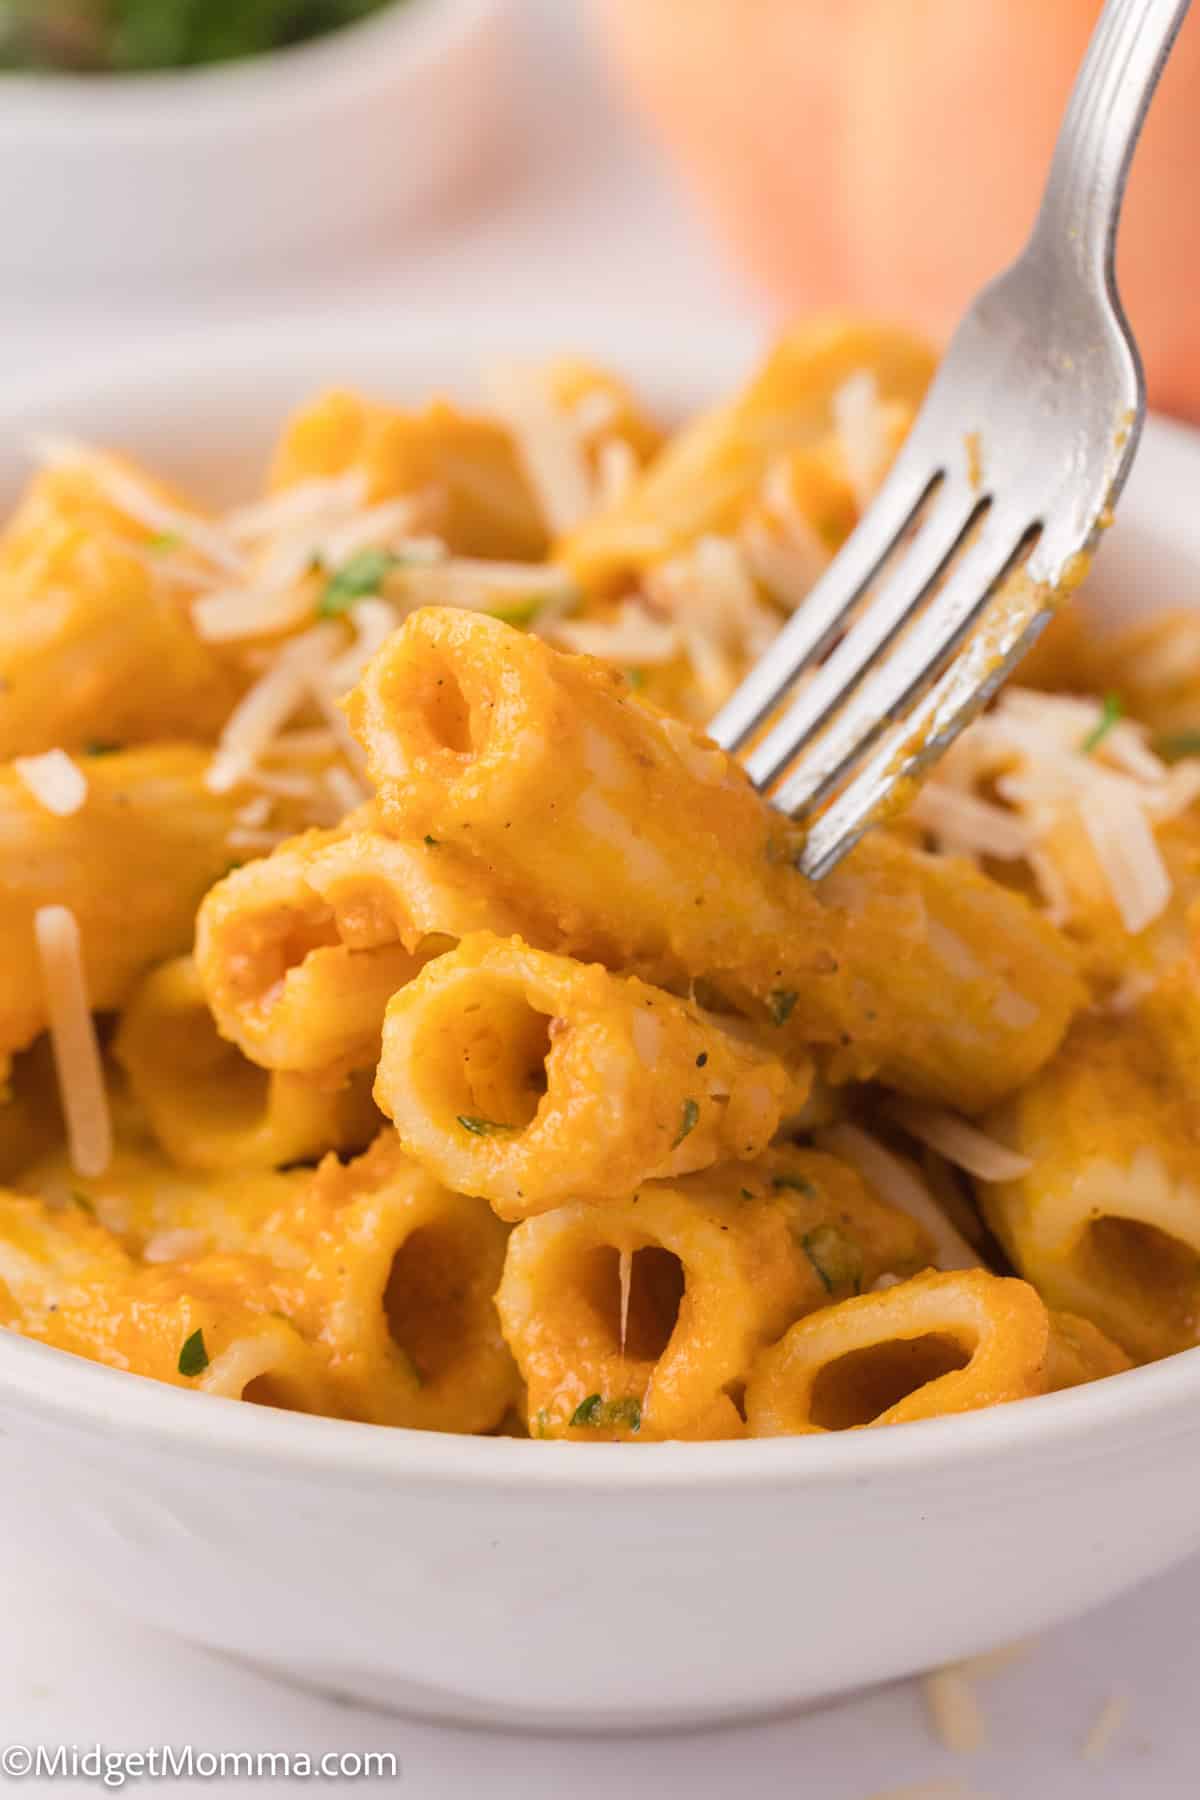 A fork lifts a serving of creamy pasta with pumpkin pasta sauce, garnished with parsley and grated cheese, with a blurred background.